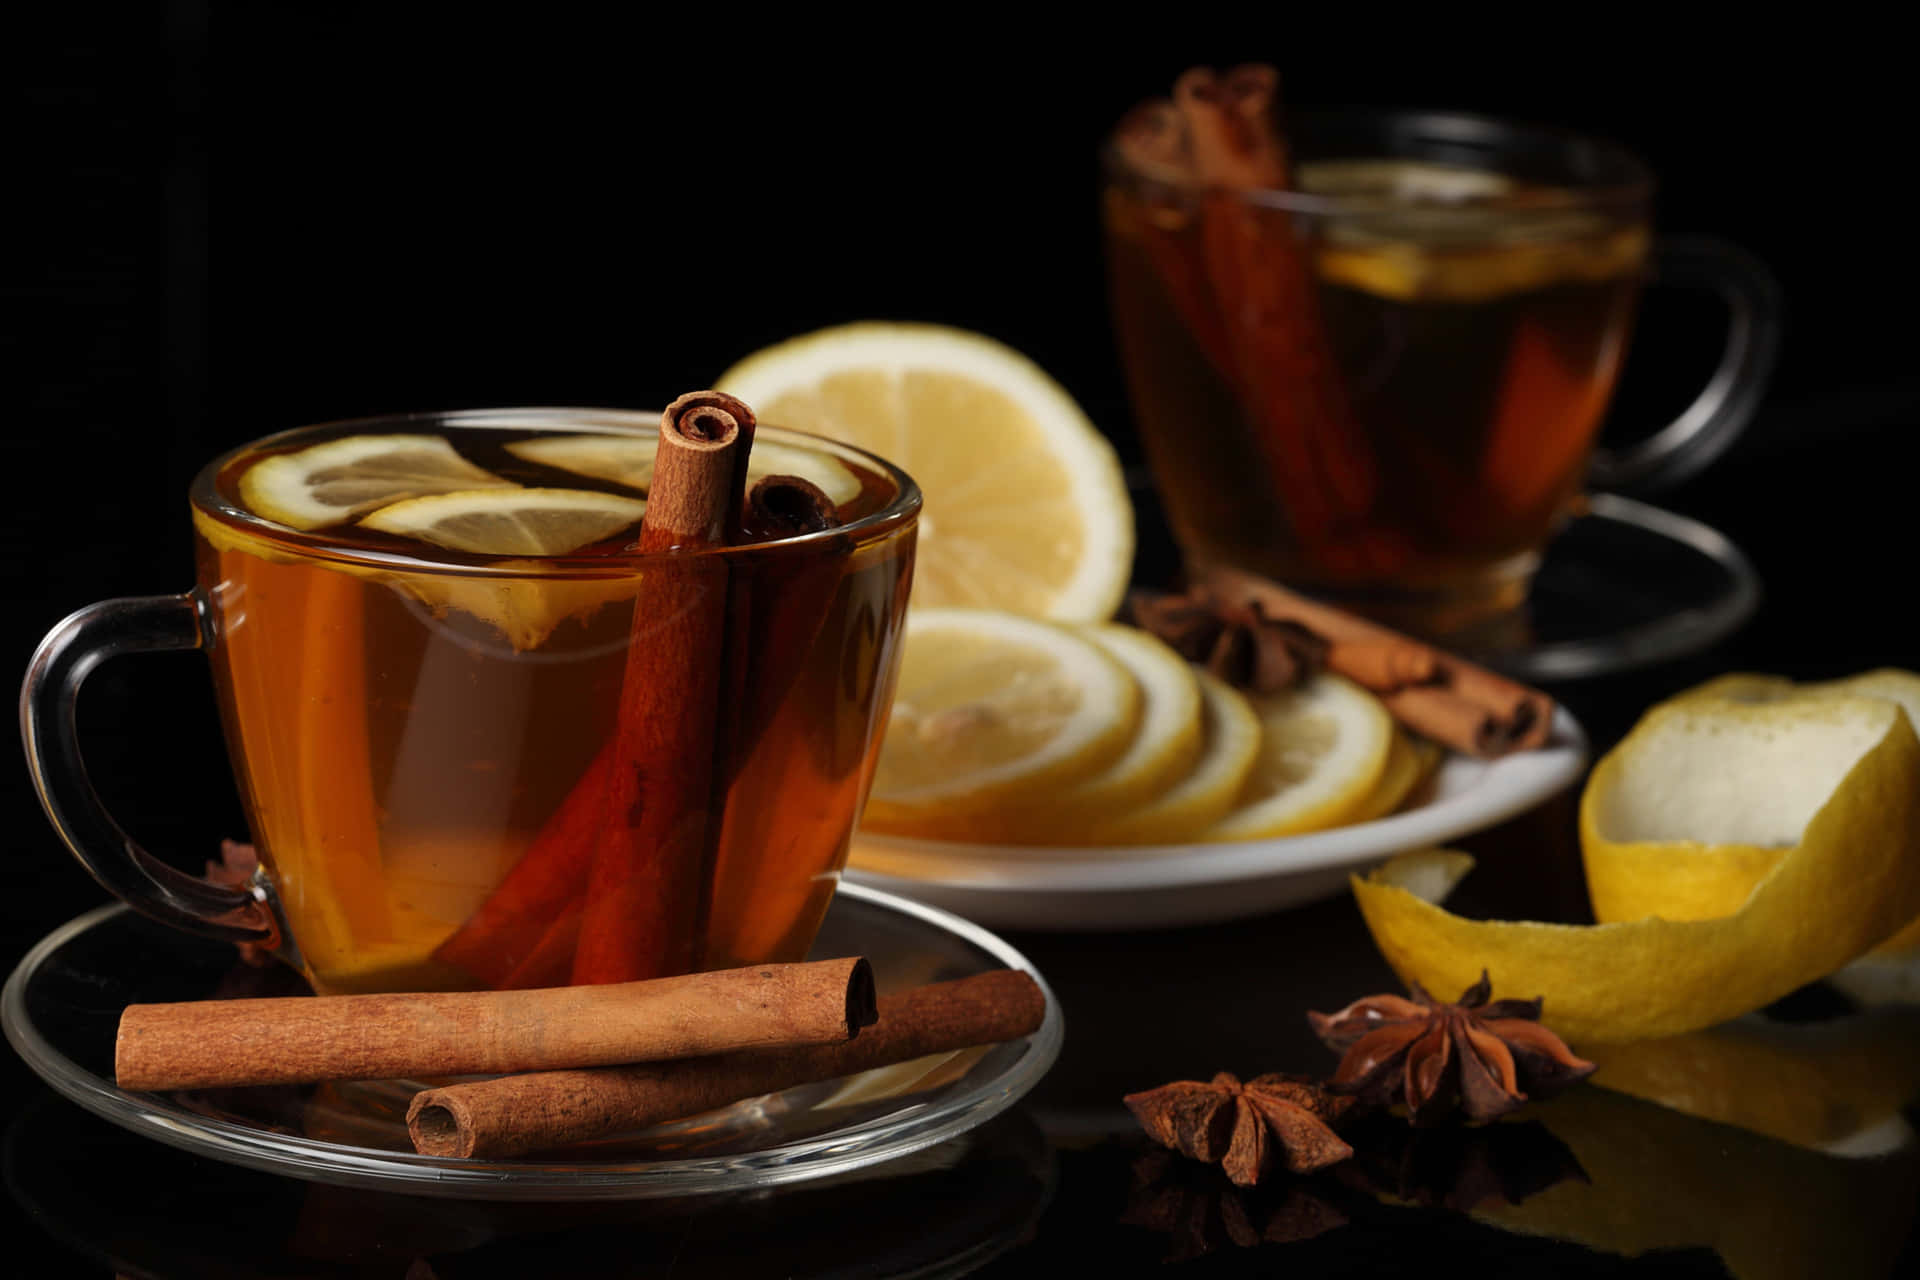 A Cup Of Tea With Cinnamon, Lemon And Anise